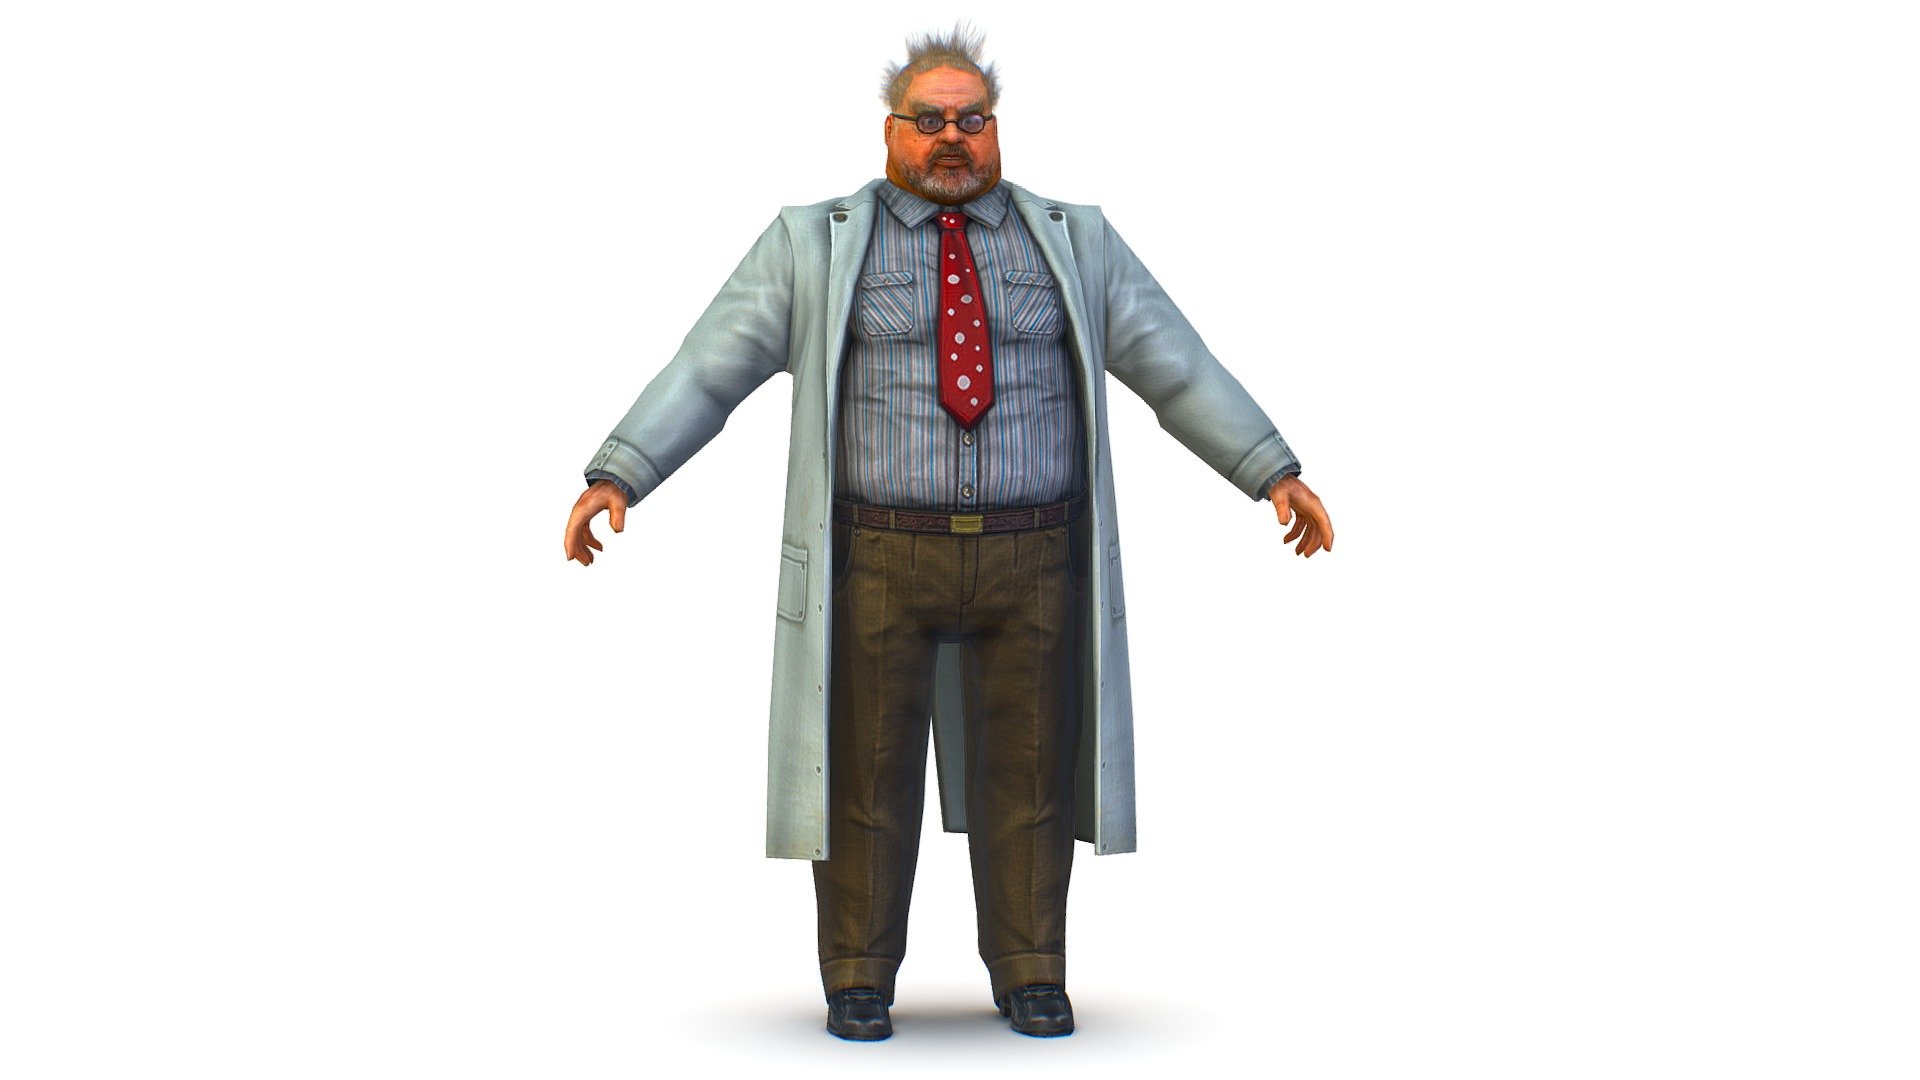 a disheveled, fat old man in a chemistry coat - 3dsMax file included/ texture 512 color only. body and head 3d model